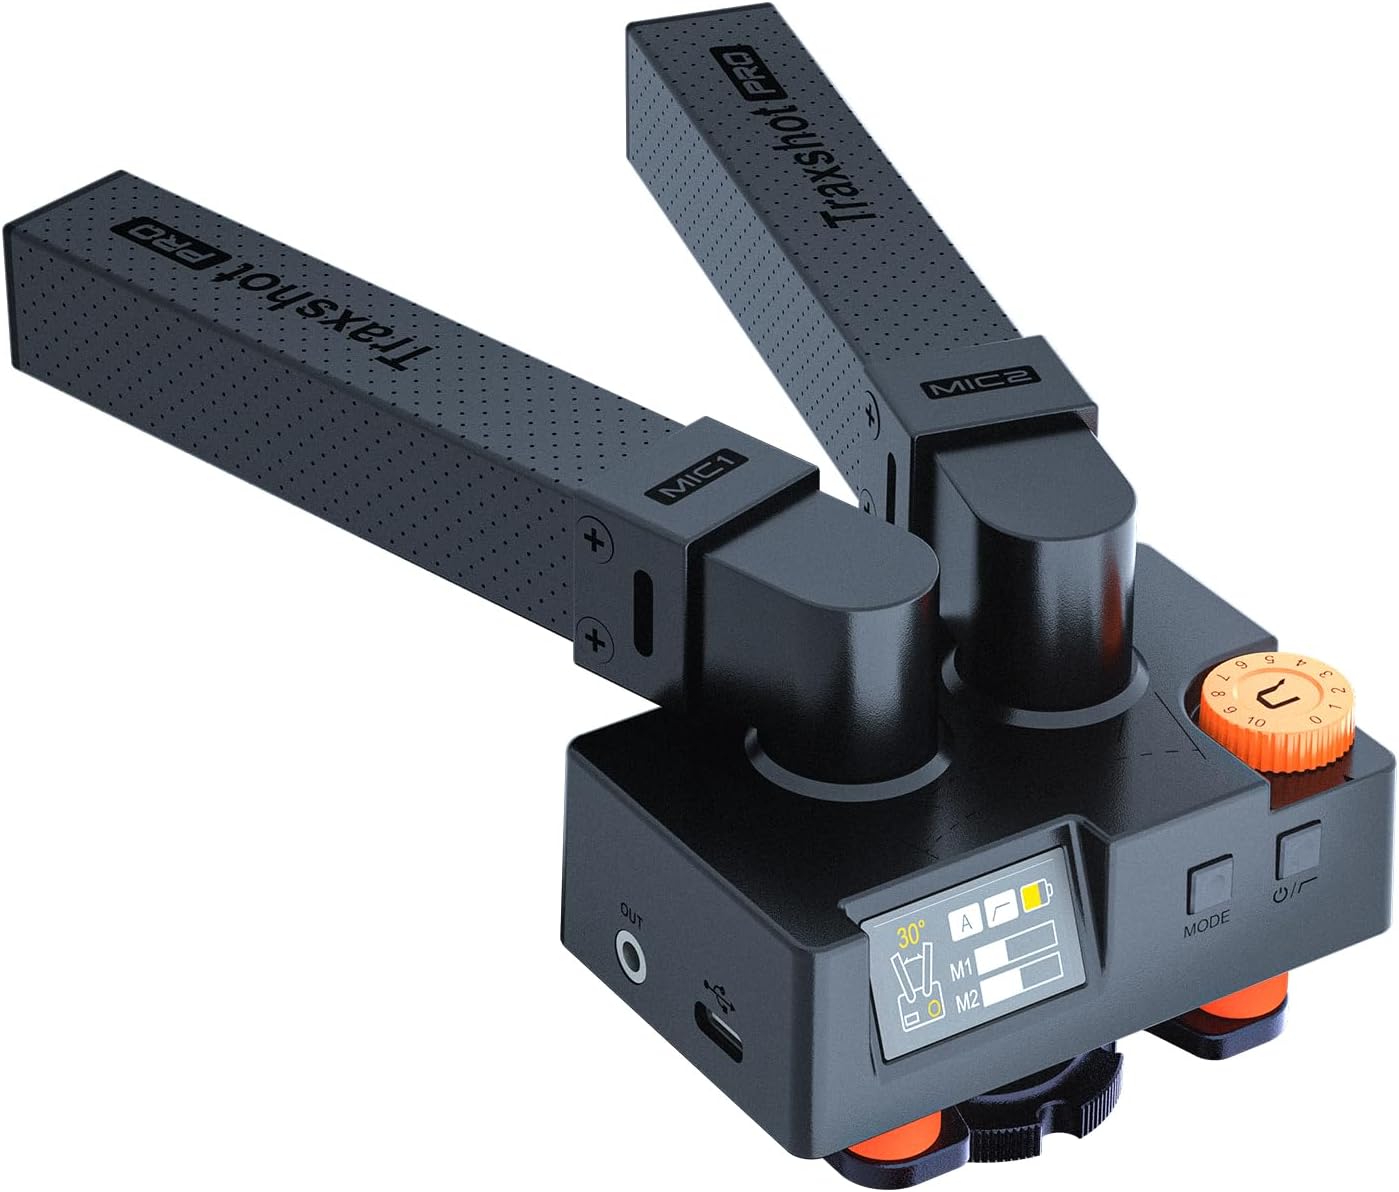 Camcorder Accessories: Exploring Essential and Optional Additions